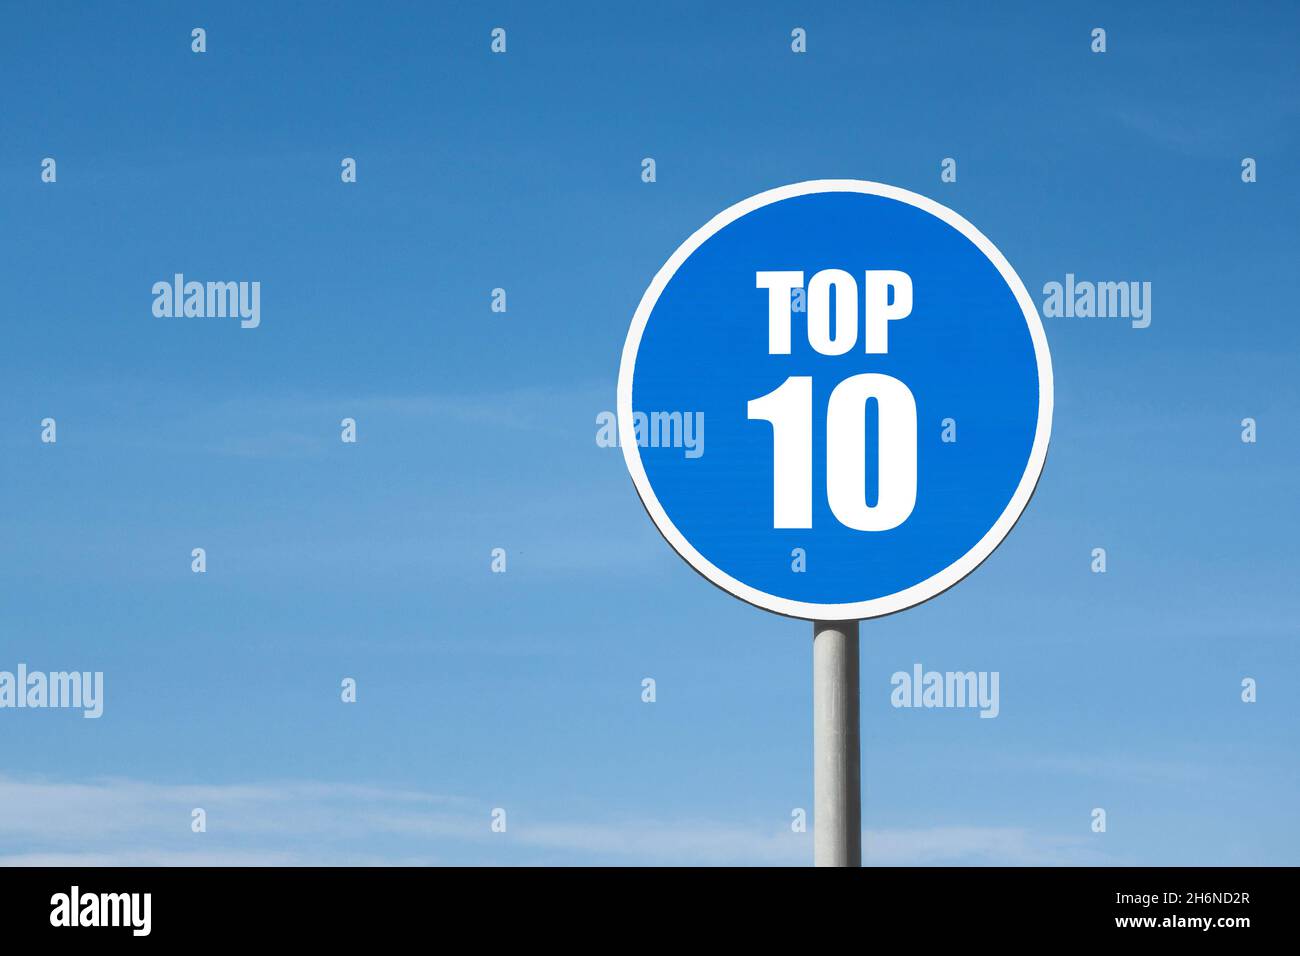 'Top 10' sign in blue round frame on sky background Stock Photo